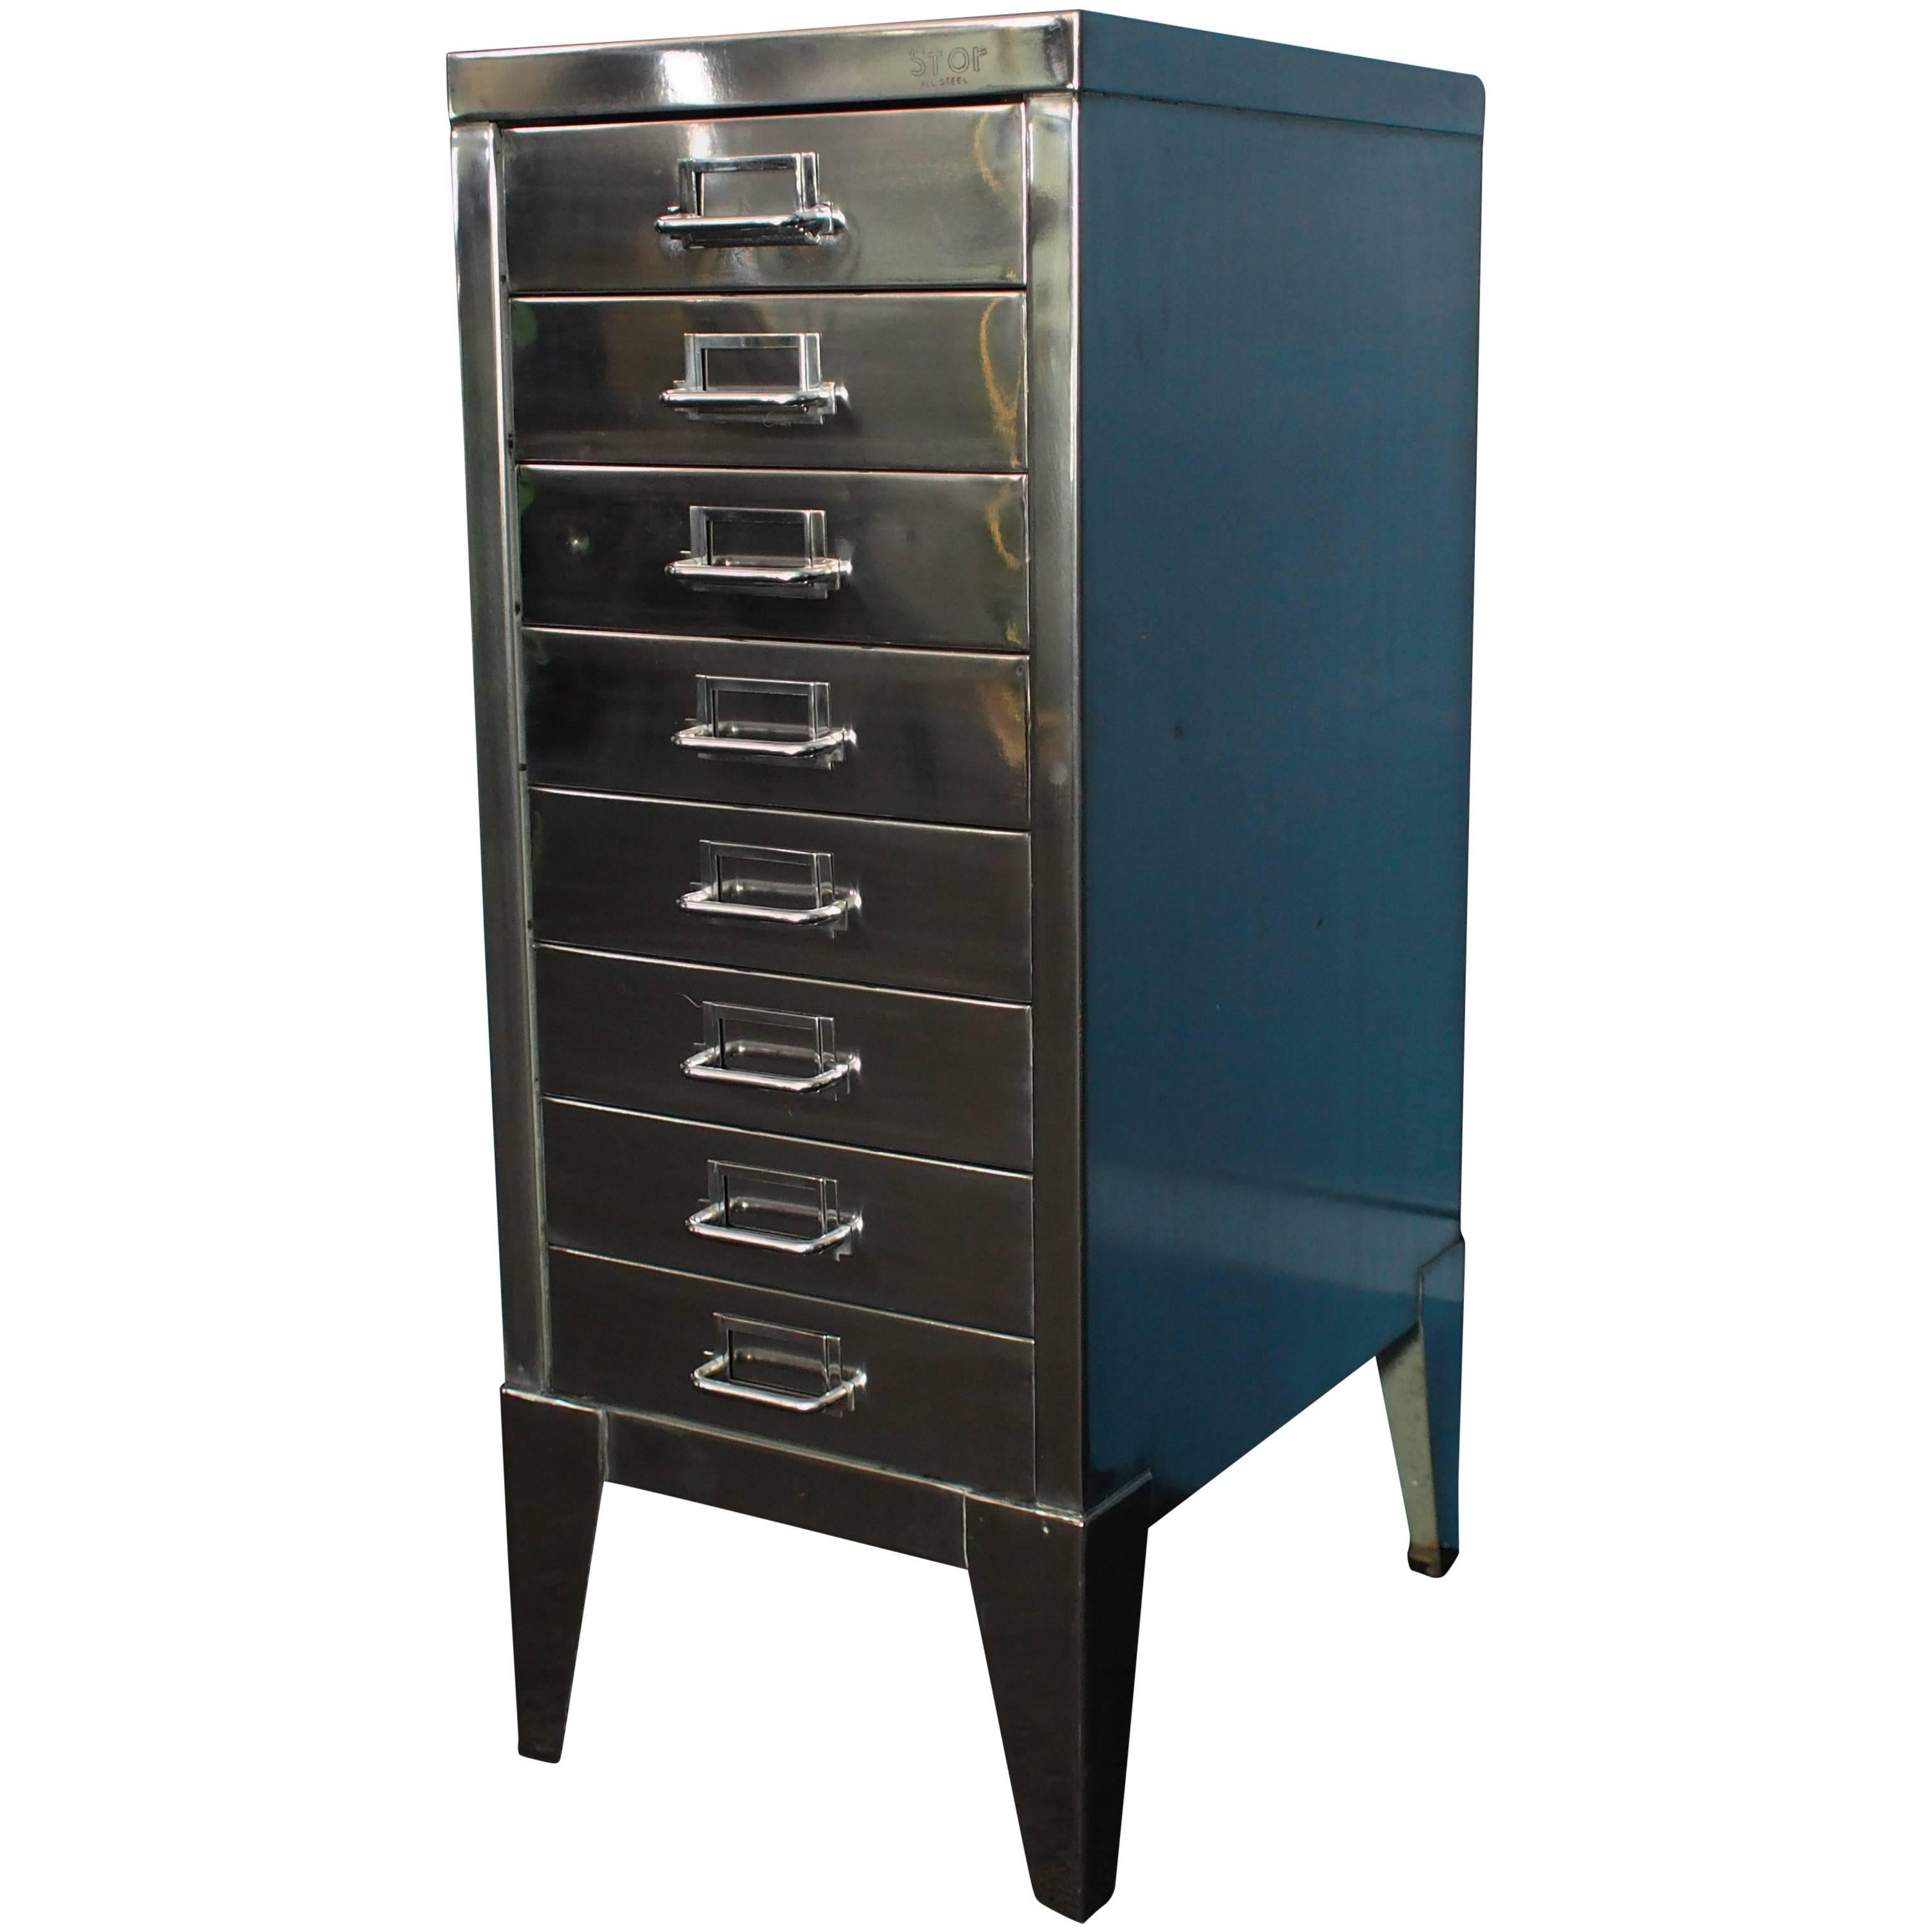 Industrial Polished Steel Filing Cabinet with Tapered Legs by Stor, circa 1950s